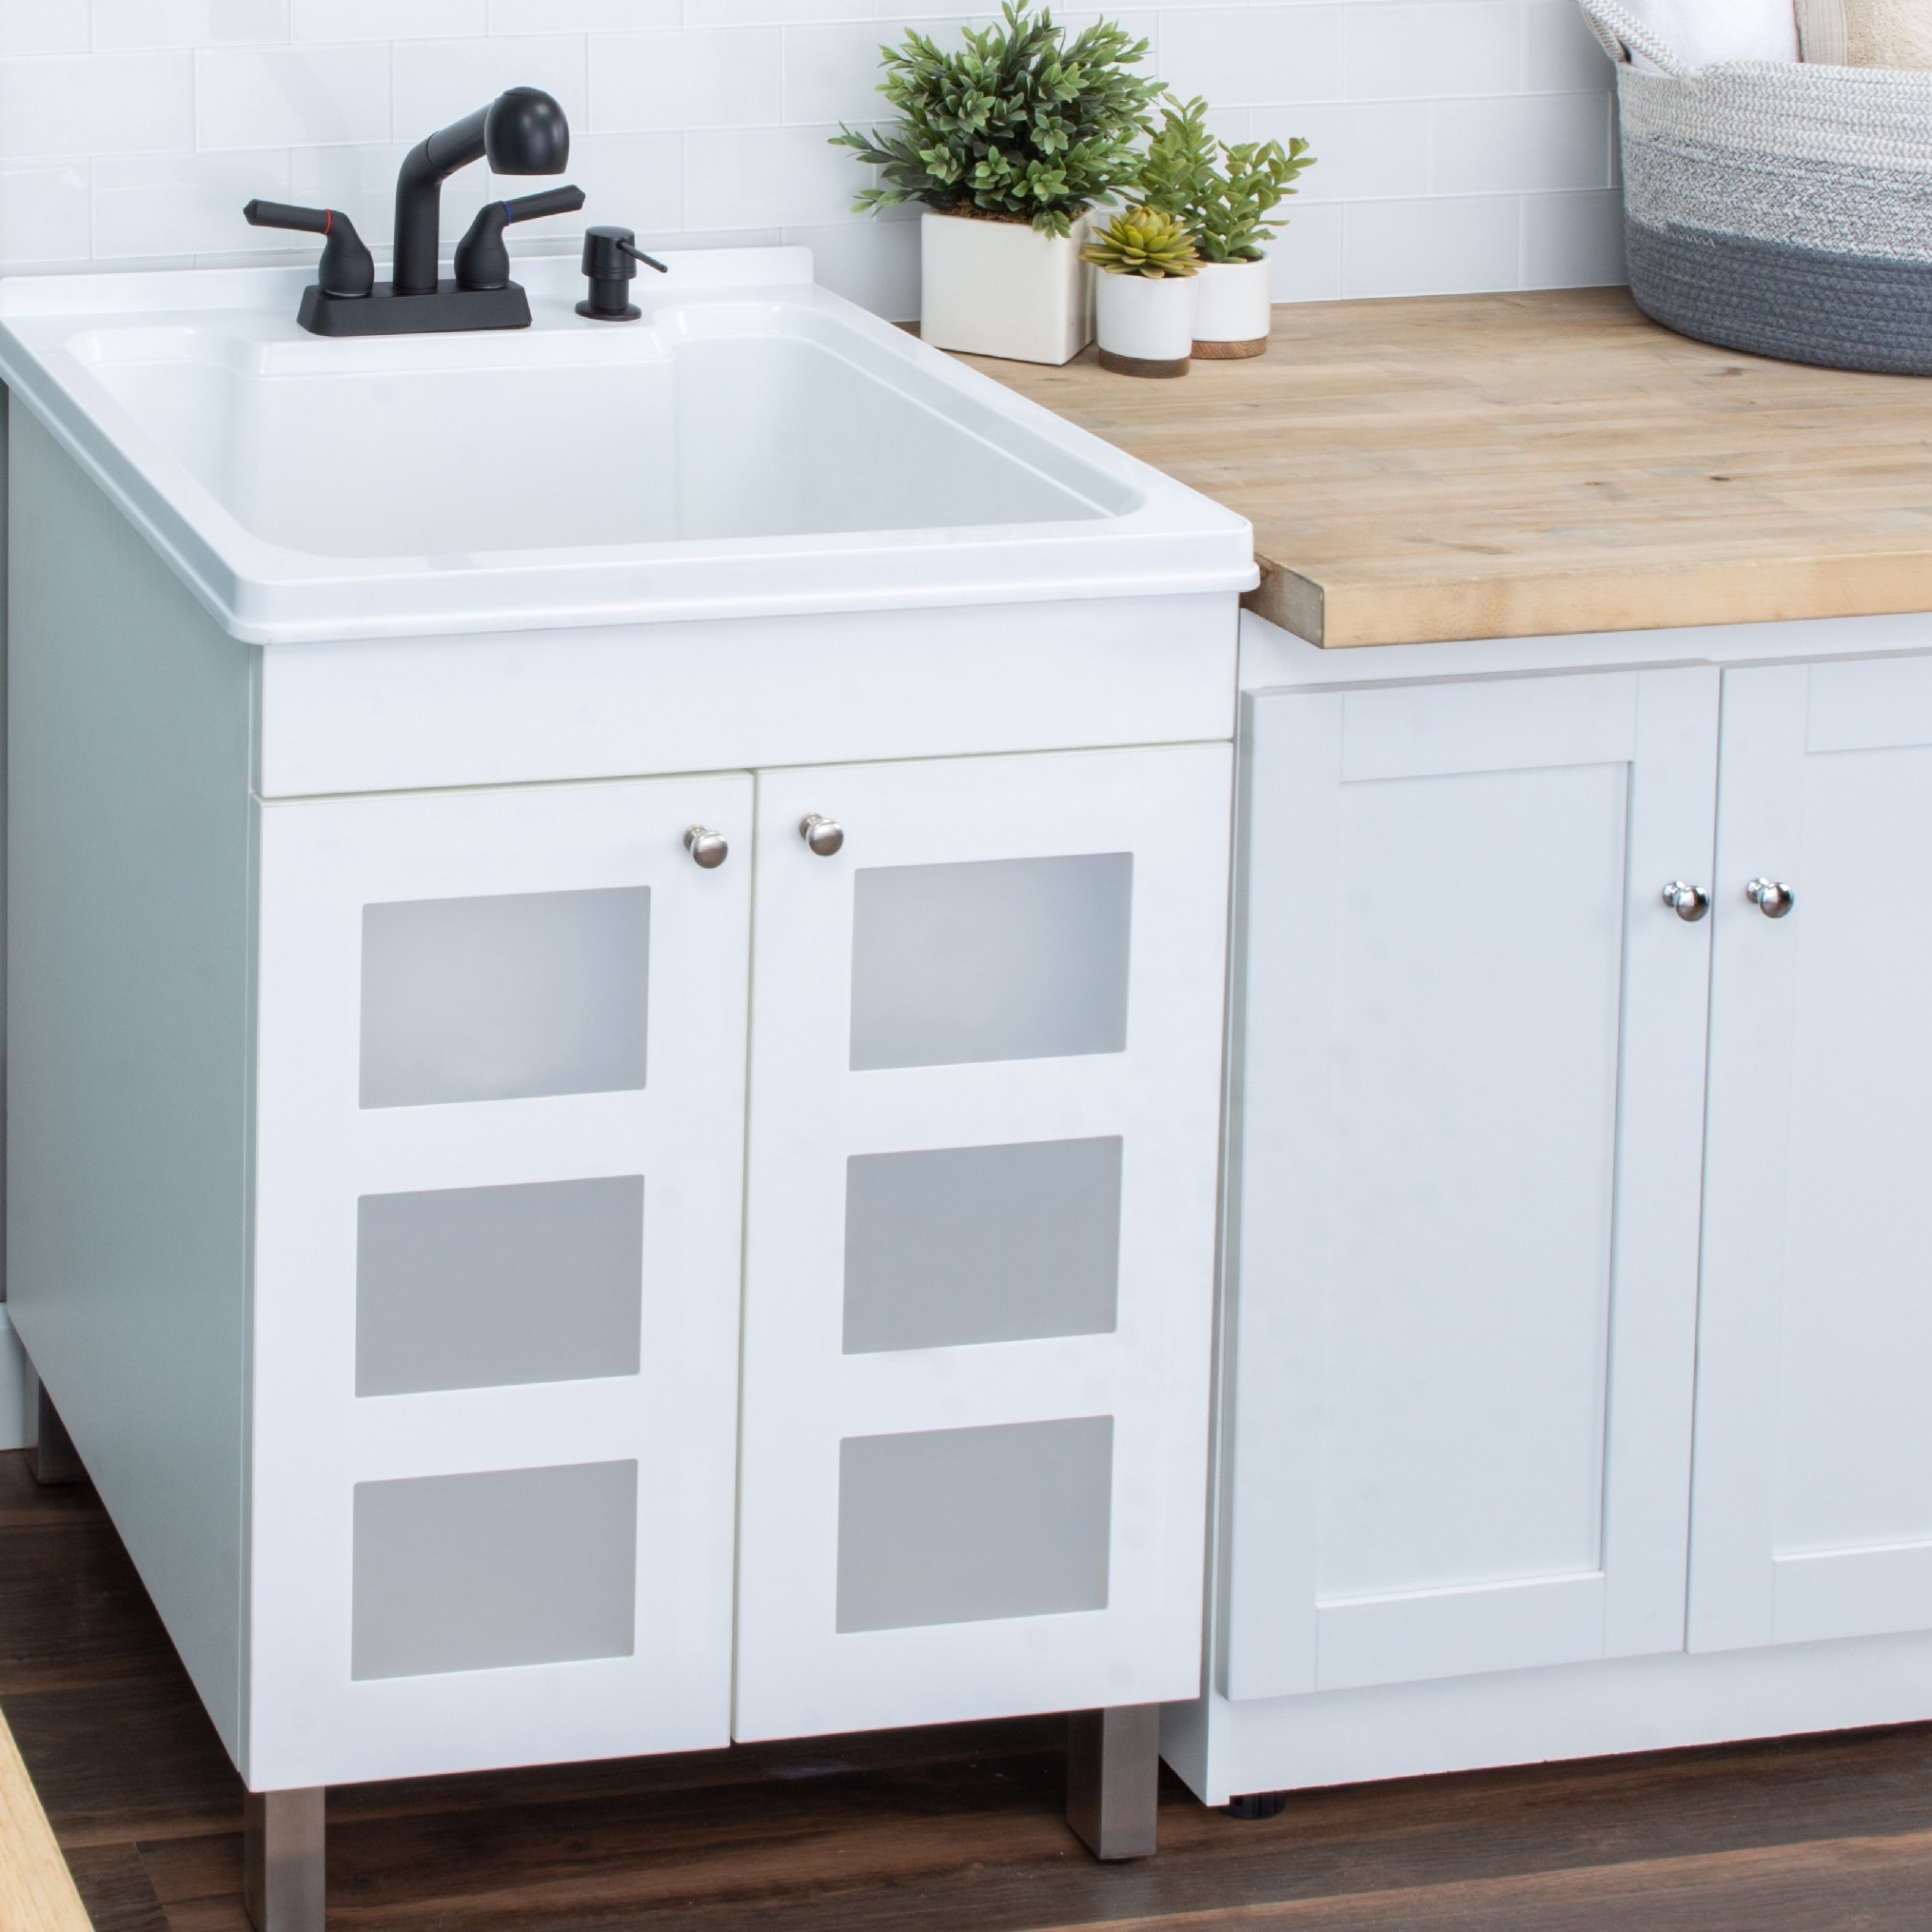 Utility Sink with Cabinet